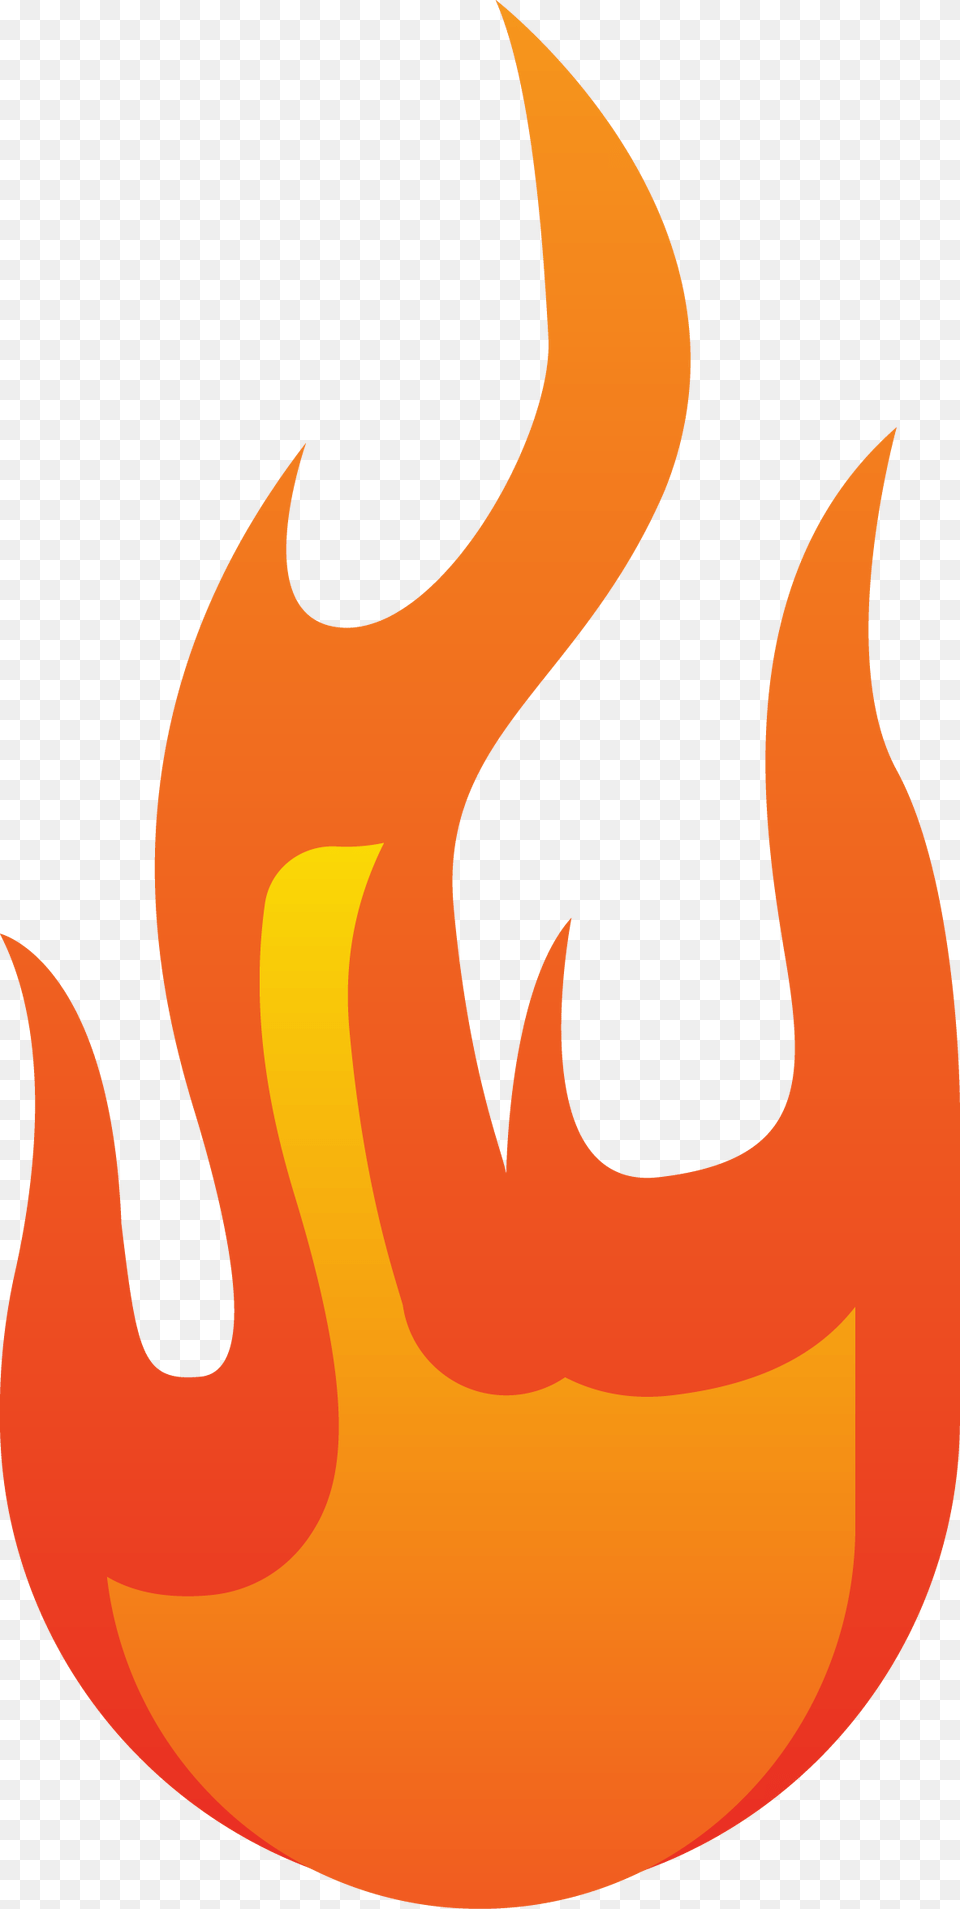 Flame Combustion Fire Euclidean Vector Clipart Conbustio Png Image